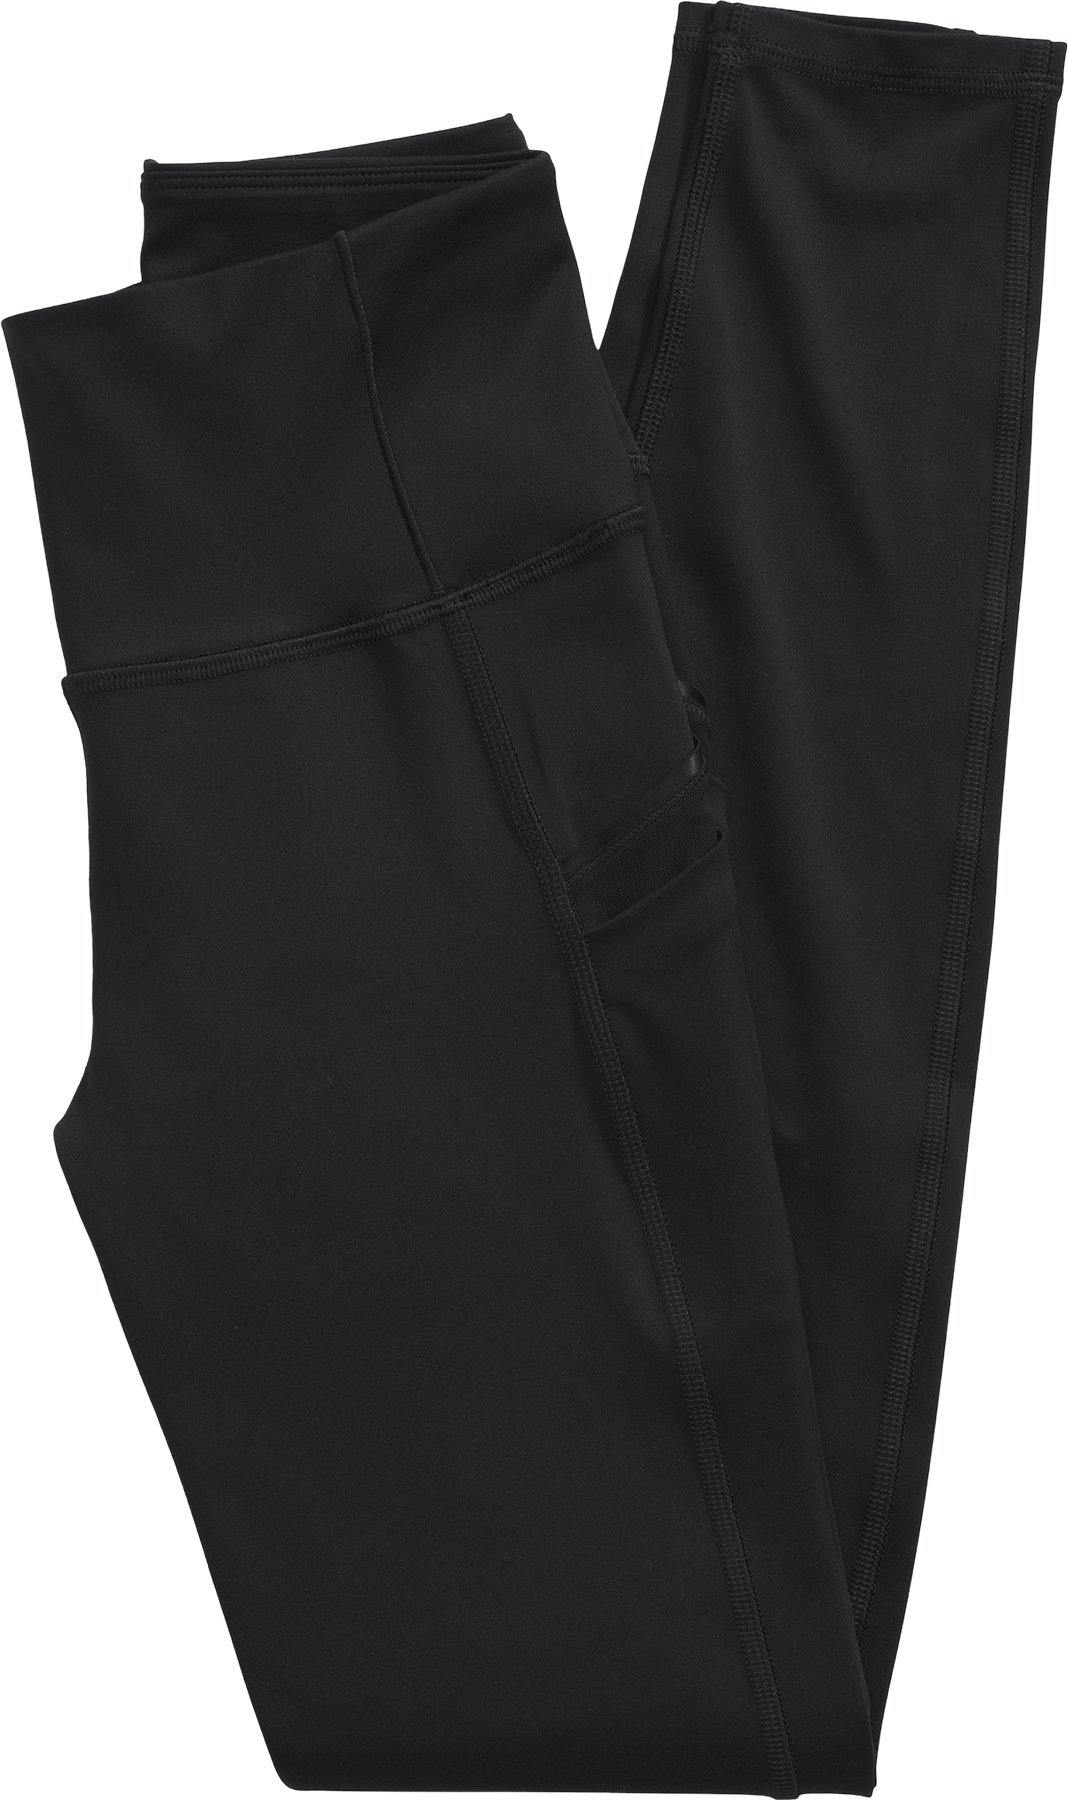 Product image for Dune Sky Utility Tights - Women’s